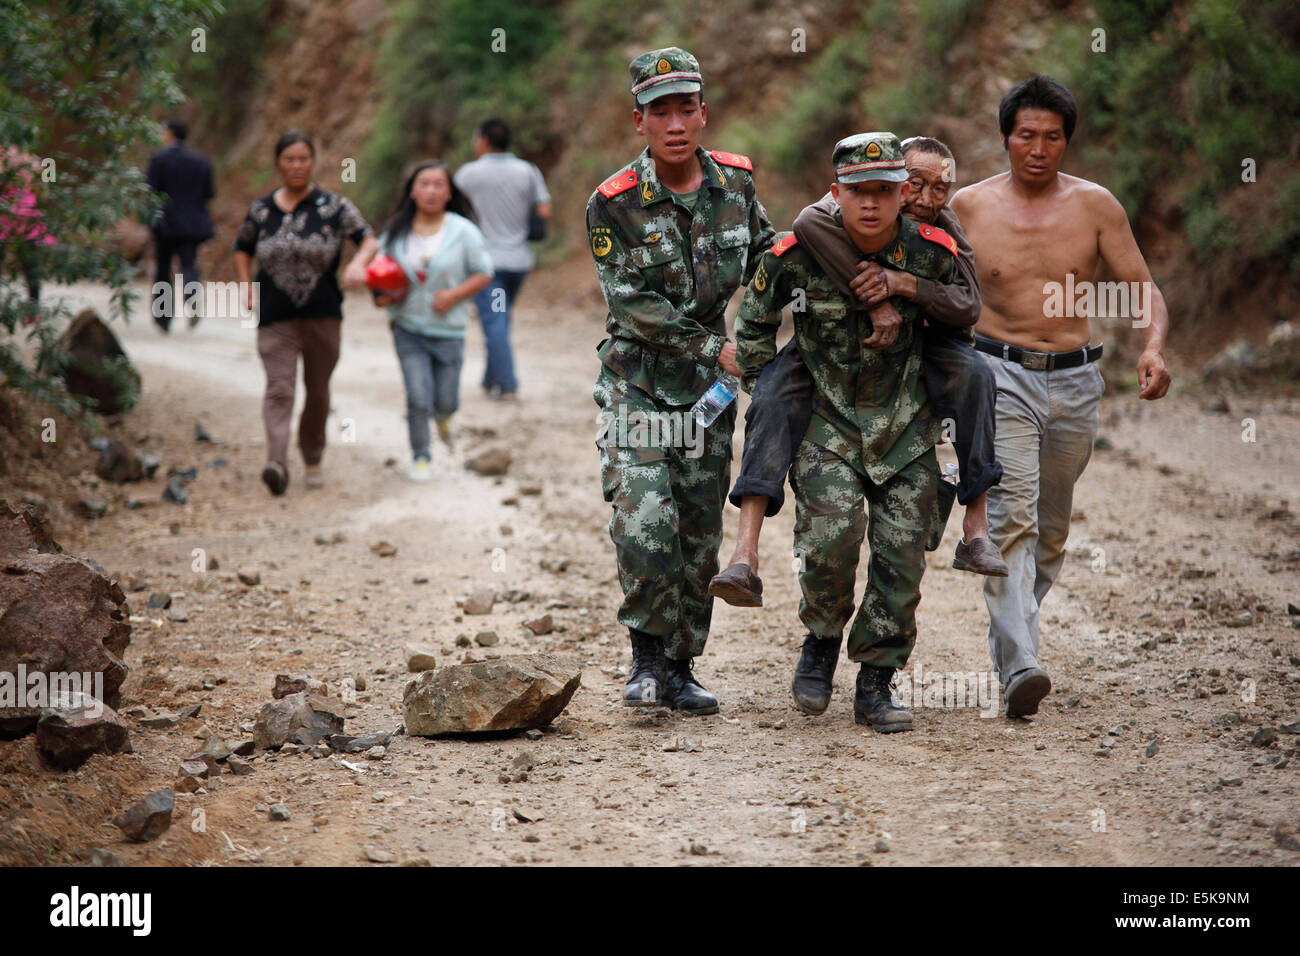 Zhaotong. 3rd Aug, 2014. Rescuers transport an injured man after an earthquake in Ludian County of Zhaotong City in southwest China's Yunnan Province, Aug. 3, 2014. A 6.5-magnitude earthquake jolted Ludian County at 4:30 p.m. Sunday (Beijing Time), said the China Earthquake Networks Center (CENC). The Ministry of Civil Affairs has reported that the updated number of casualty is 175 dead and 181 missing. Credit:  Zhang Guangyu/Xinhua/Alamy Live News Stock Photo